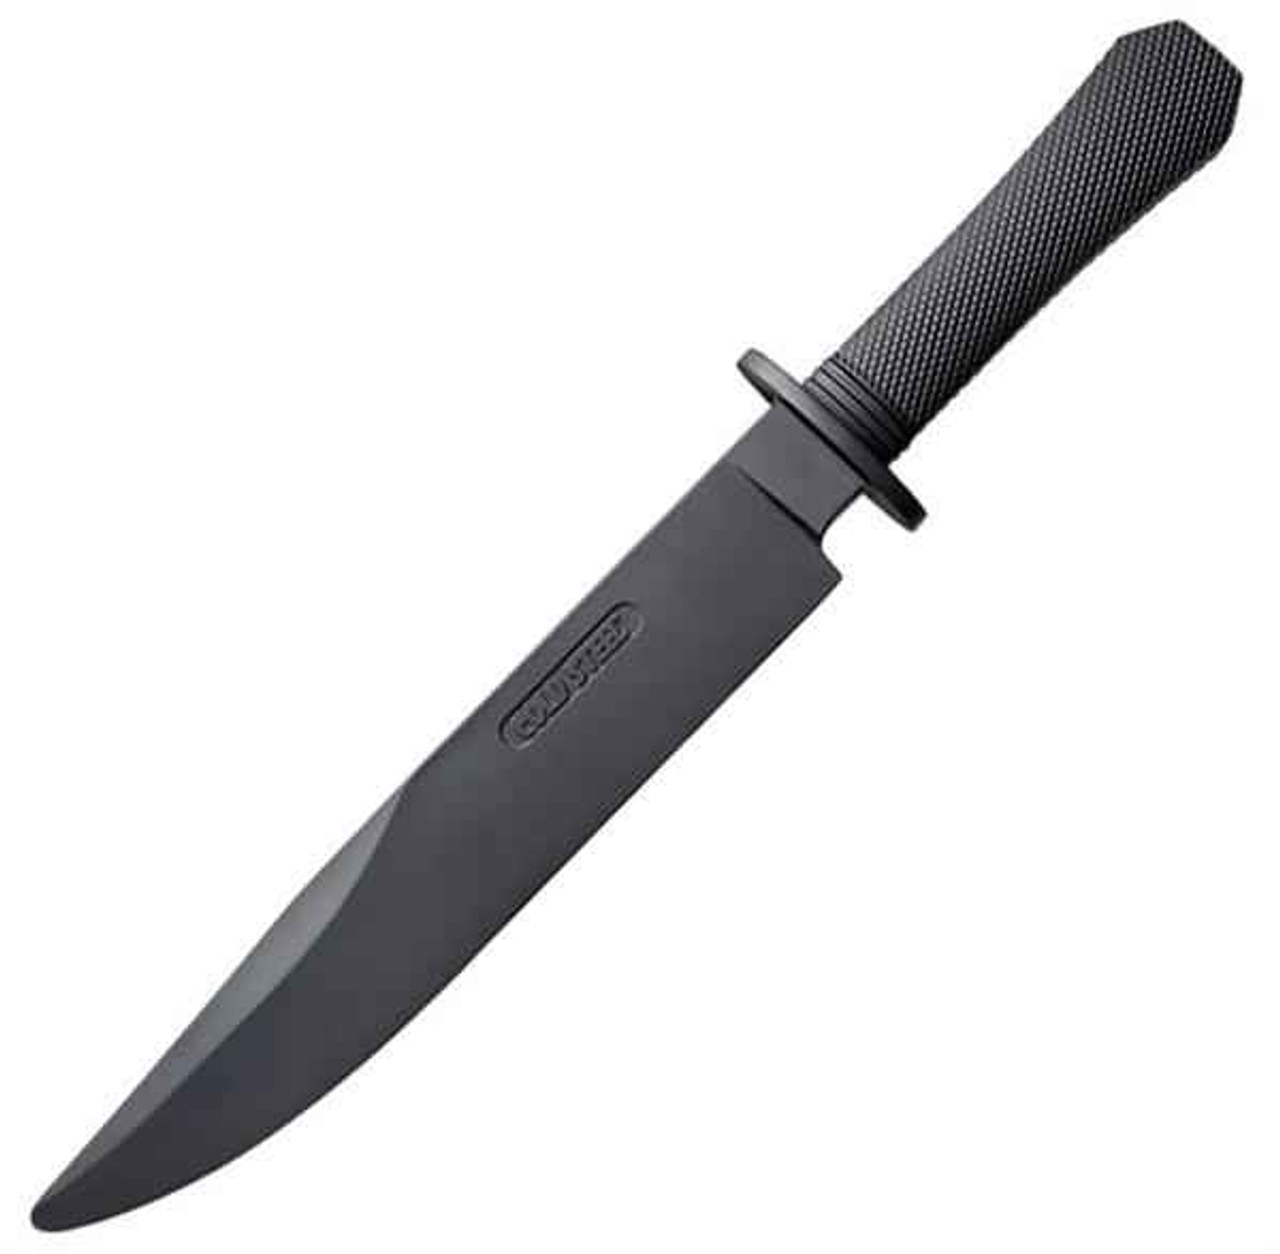 Cold Steel 92R16CCB Rubber Training Laredo Bowie, Santoprene, 16" Overall